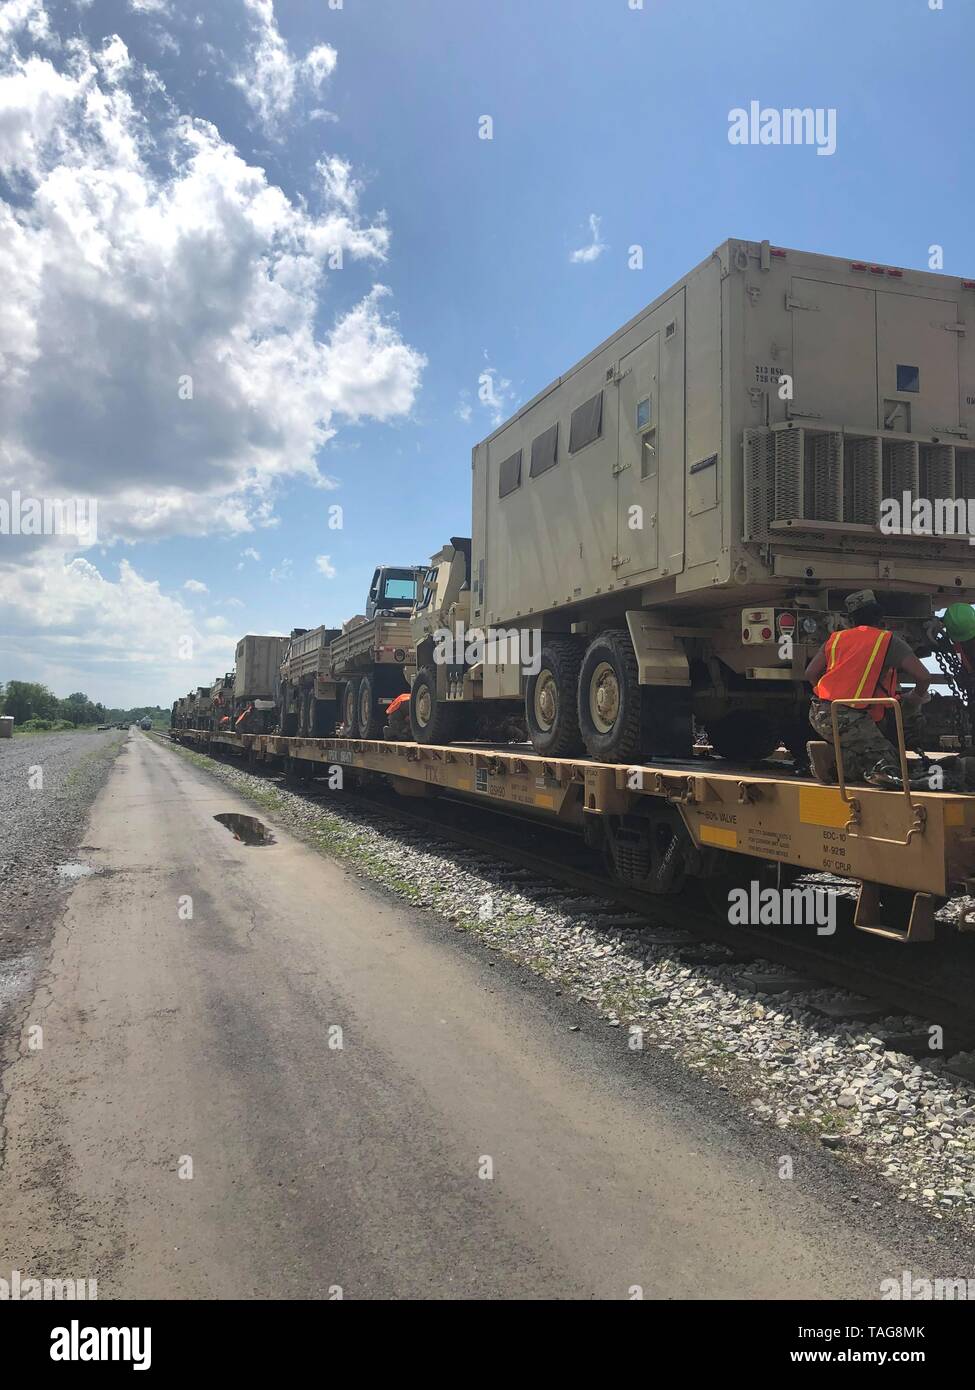 U.S. Soldiers with a rail operations task force, comprising Soldiers with the 28th Expeditionary Combat Aviation Brigade, 128th Chemical Company and 252nd Quartermaster Company, secure trucks aboard a train May 21, 2019, at Naval Support Activity Mechanicsburg, Pennsylvania. The task force loaded wheeled-vehicles and other equipment on to the train to be transported to the National Training Center at Fort Irwin, California in preparation for an exercise that will take place this summer. (U.S. Army photo by Chief Warrant Officer 2 Sara Christensen) Stock Photo